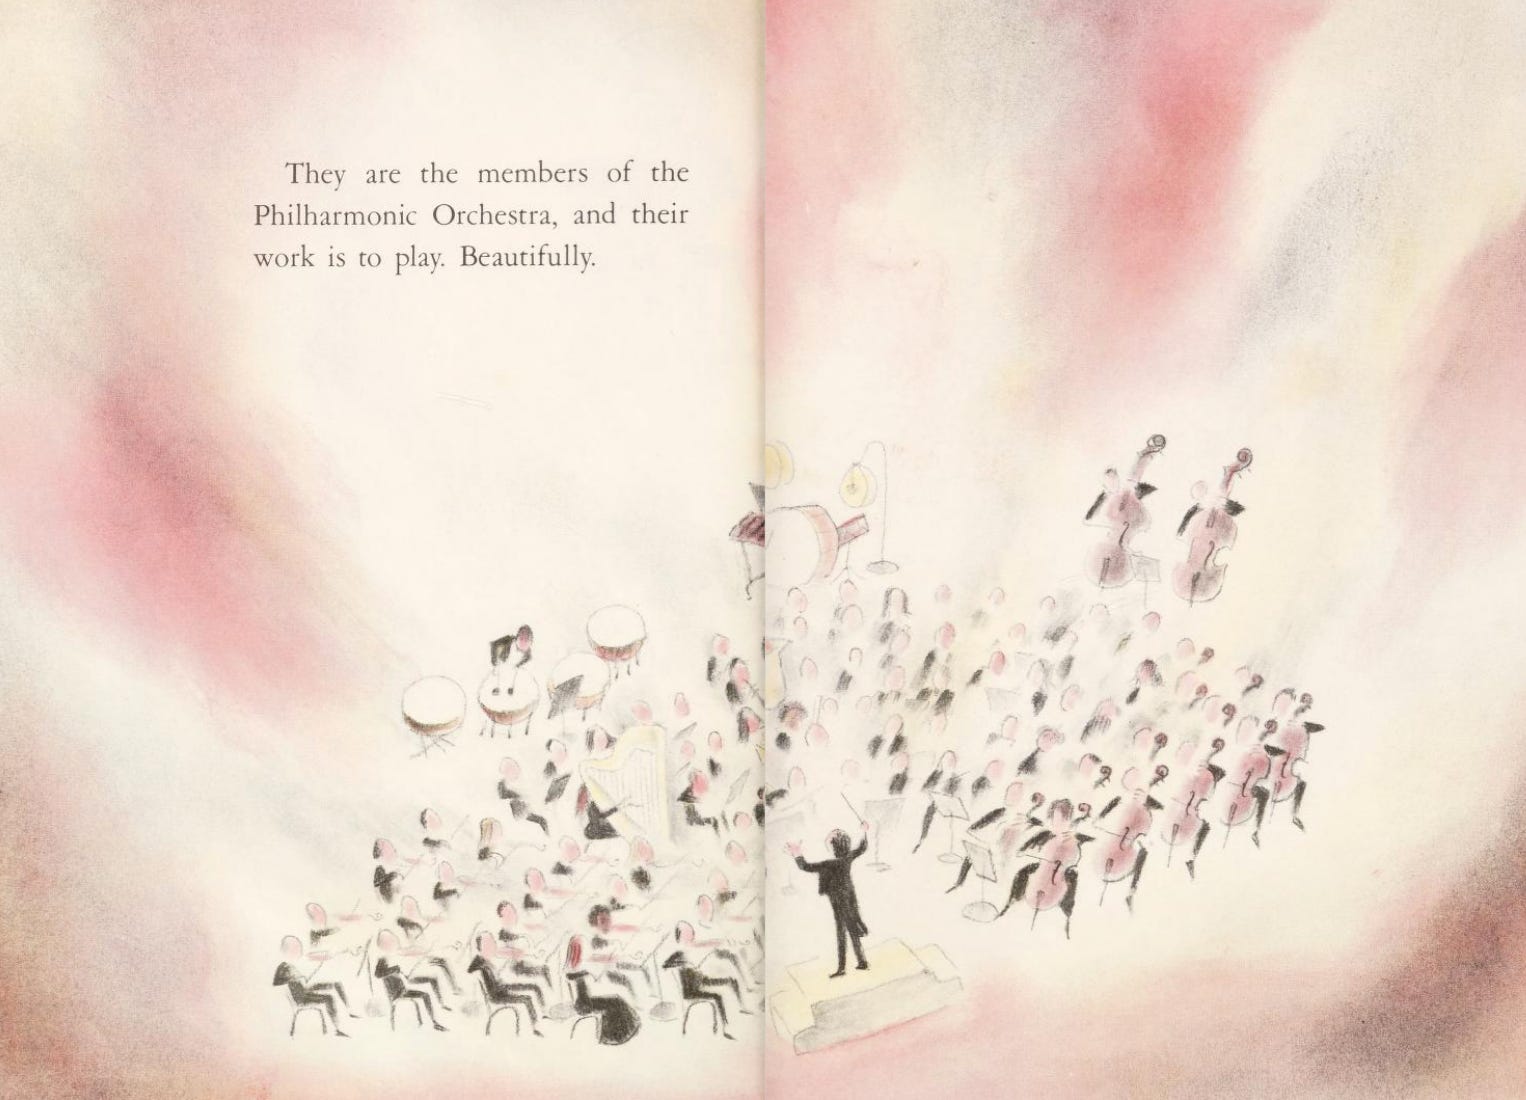 Illustration from The Philharmonic Gets Dressed by Karla Kuskin (Author) and Marc Simont (Illustrator). Text reads "They are the members of the Philharmonic Orchestra, and their work is to play. Beautifully."